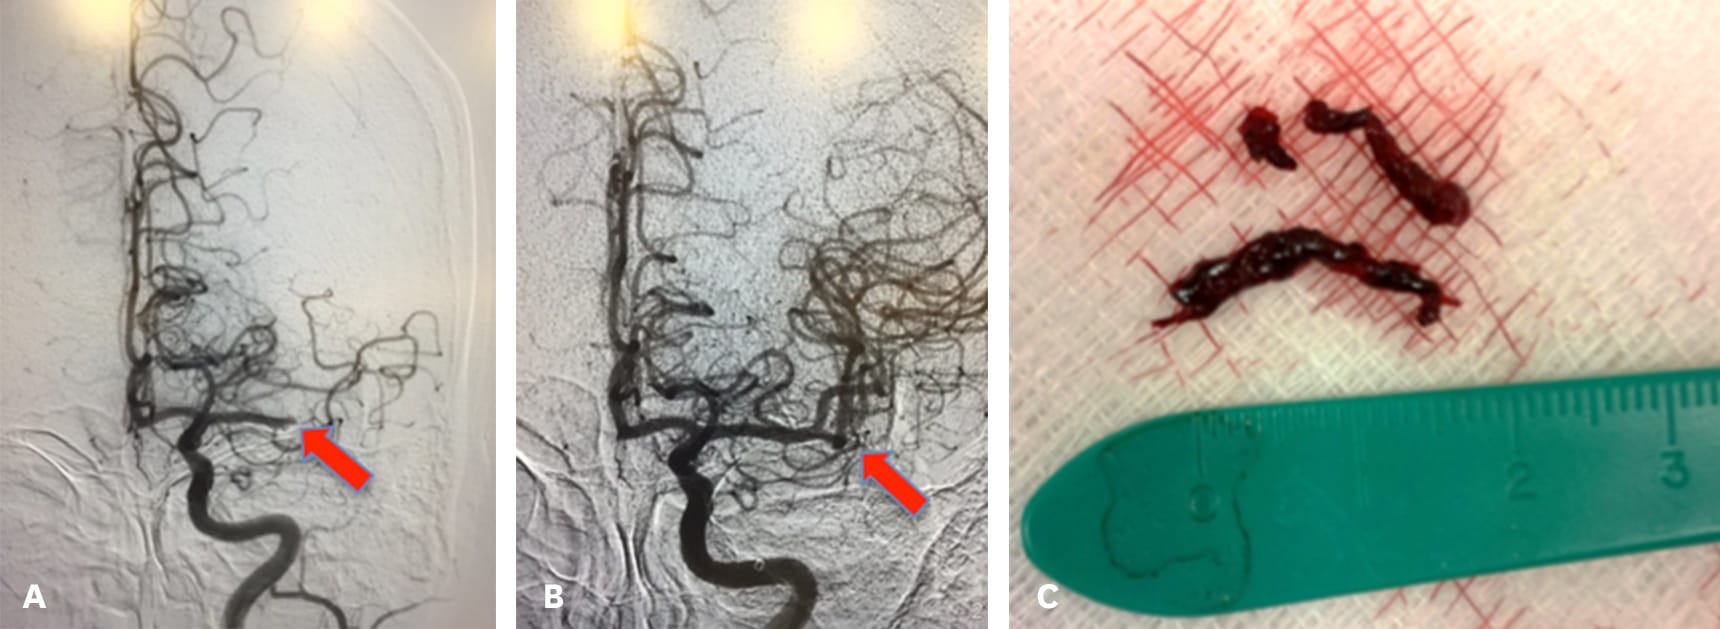 Figure 4 – For patients with mismatch between core infarction and penumbra (see Figure 3), mechanical thrombectomy can restore blood flow and improve neurological outcome. (a) Angiogram pre-thrombectomy. Note abrupt cutoff at arrow. (b) Angiogram post-thrombectomy. Arrow denotes restored blood flow. (c) Thrombus removed from vessel.